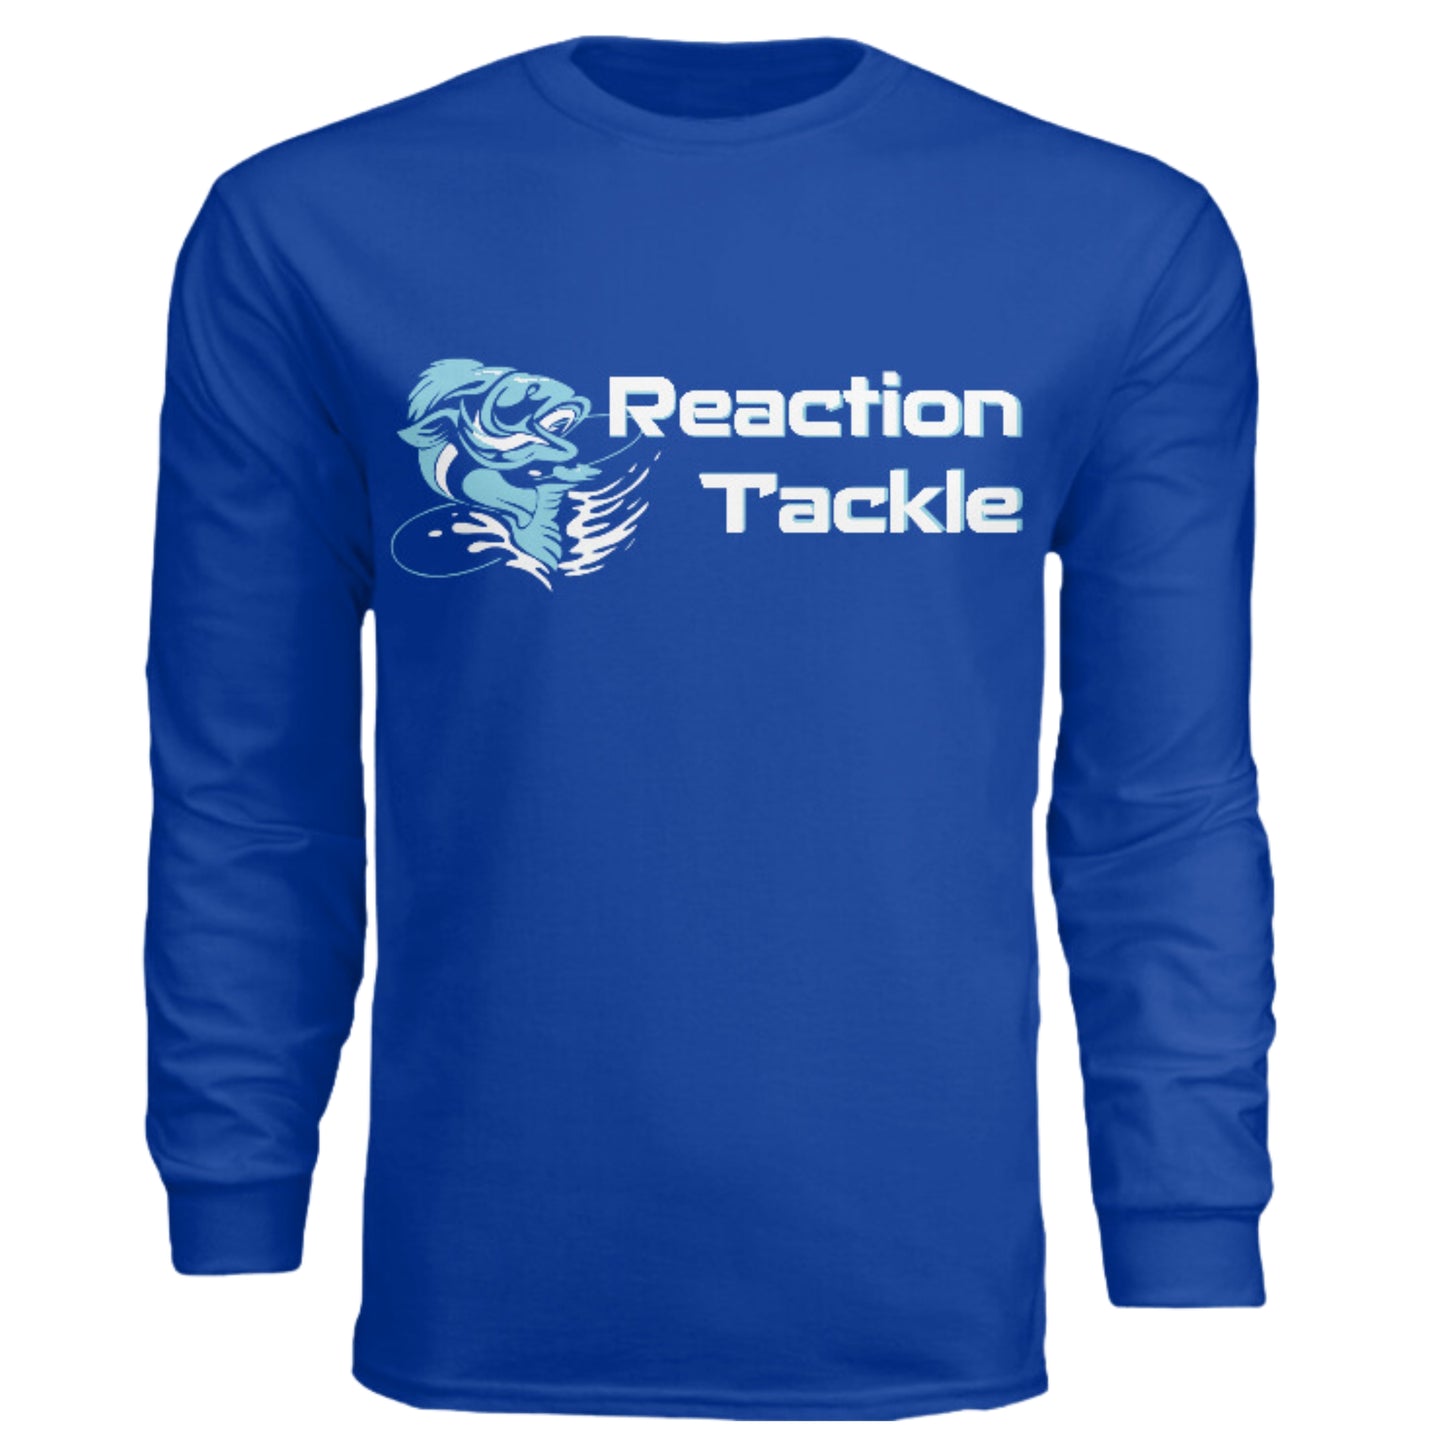 Reaction Tackle Long Sleeve Cotton T-Shirts